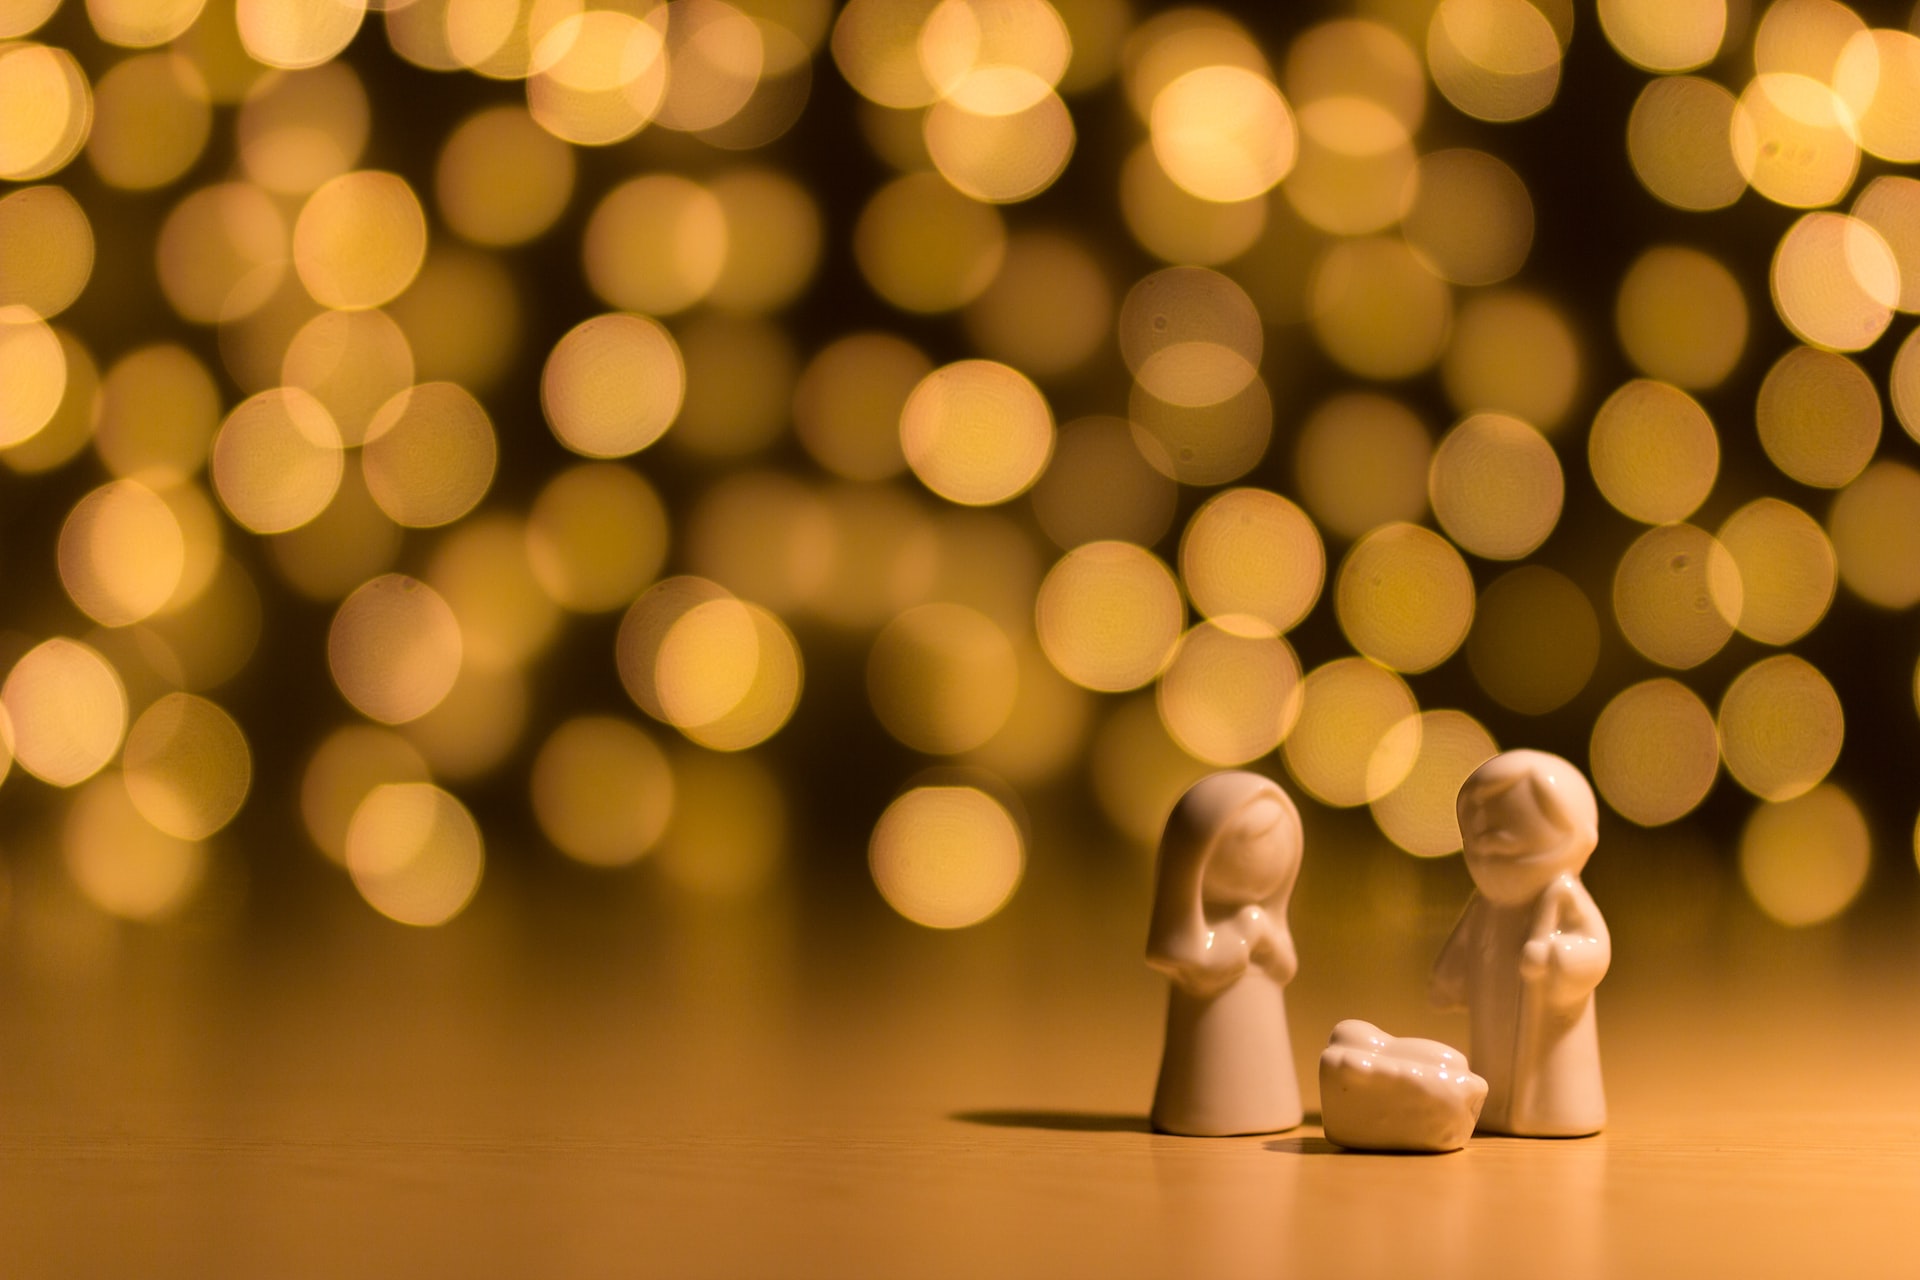 Nativity set inspired by the Gospel accounts of the birth of Jesus